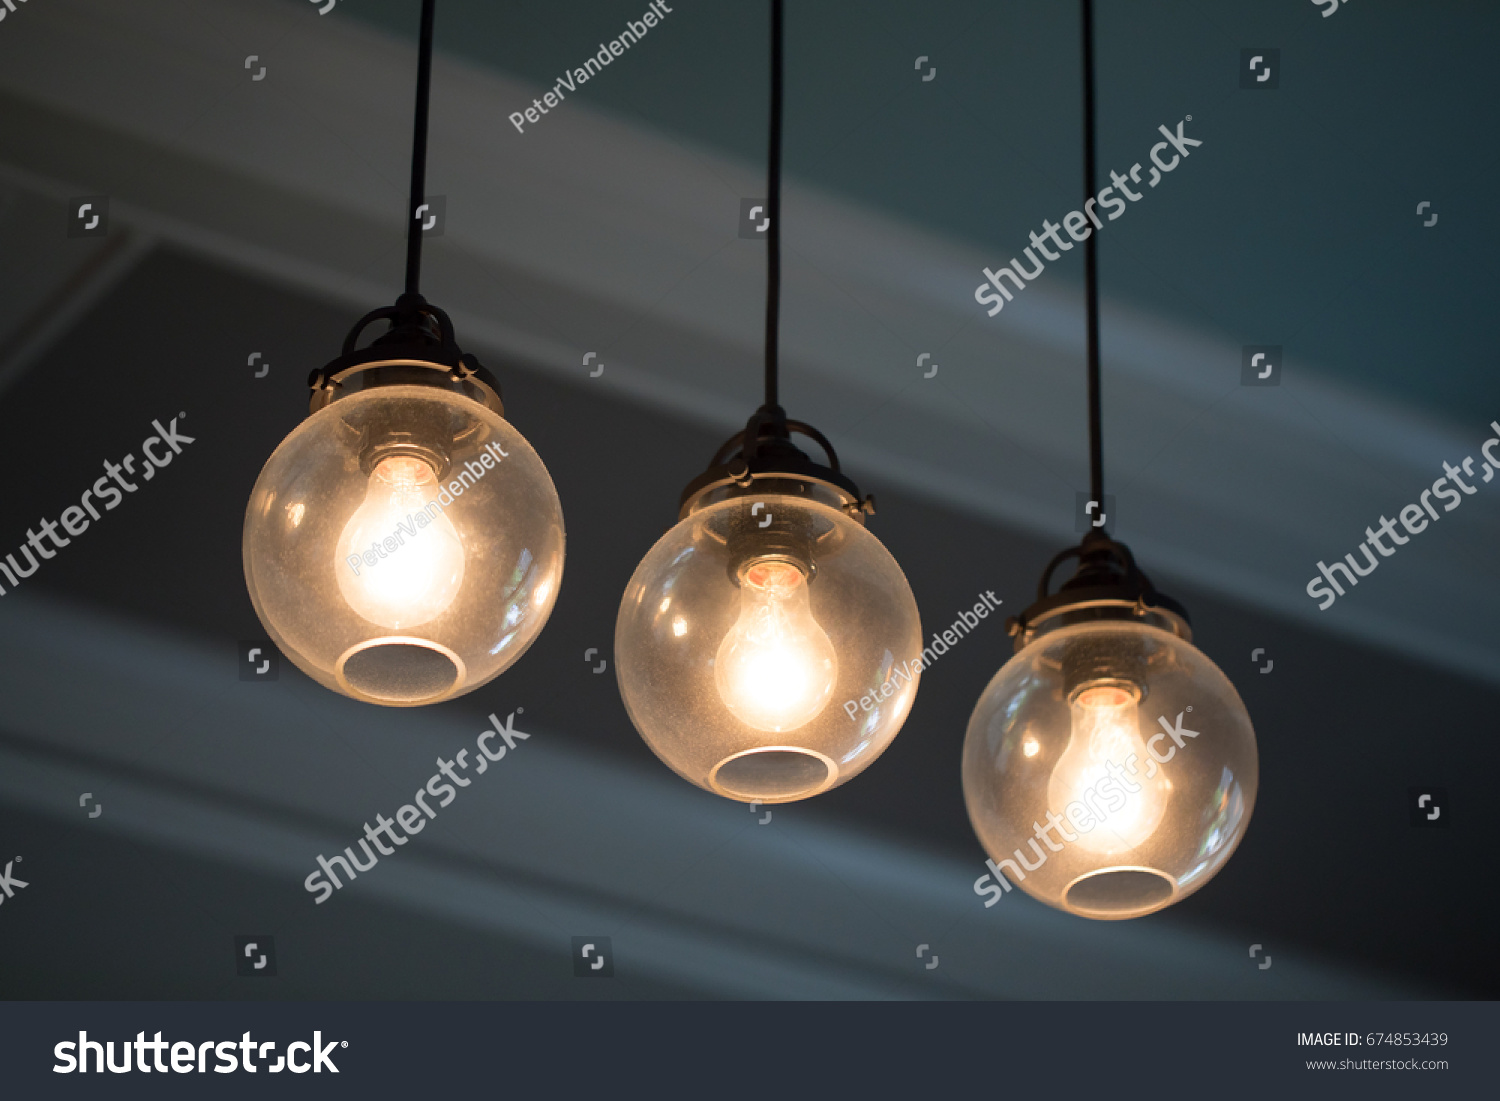 Close up midcentury modern remodeled home dining living room ceiling chandelier with three hanging incandescent illuminated light bulbs in glass globe orbs on black electrical cable with crown molding #674853439